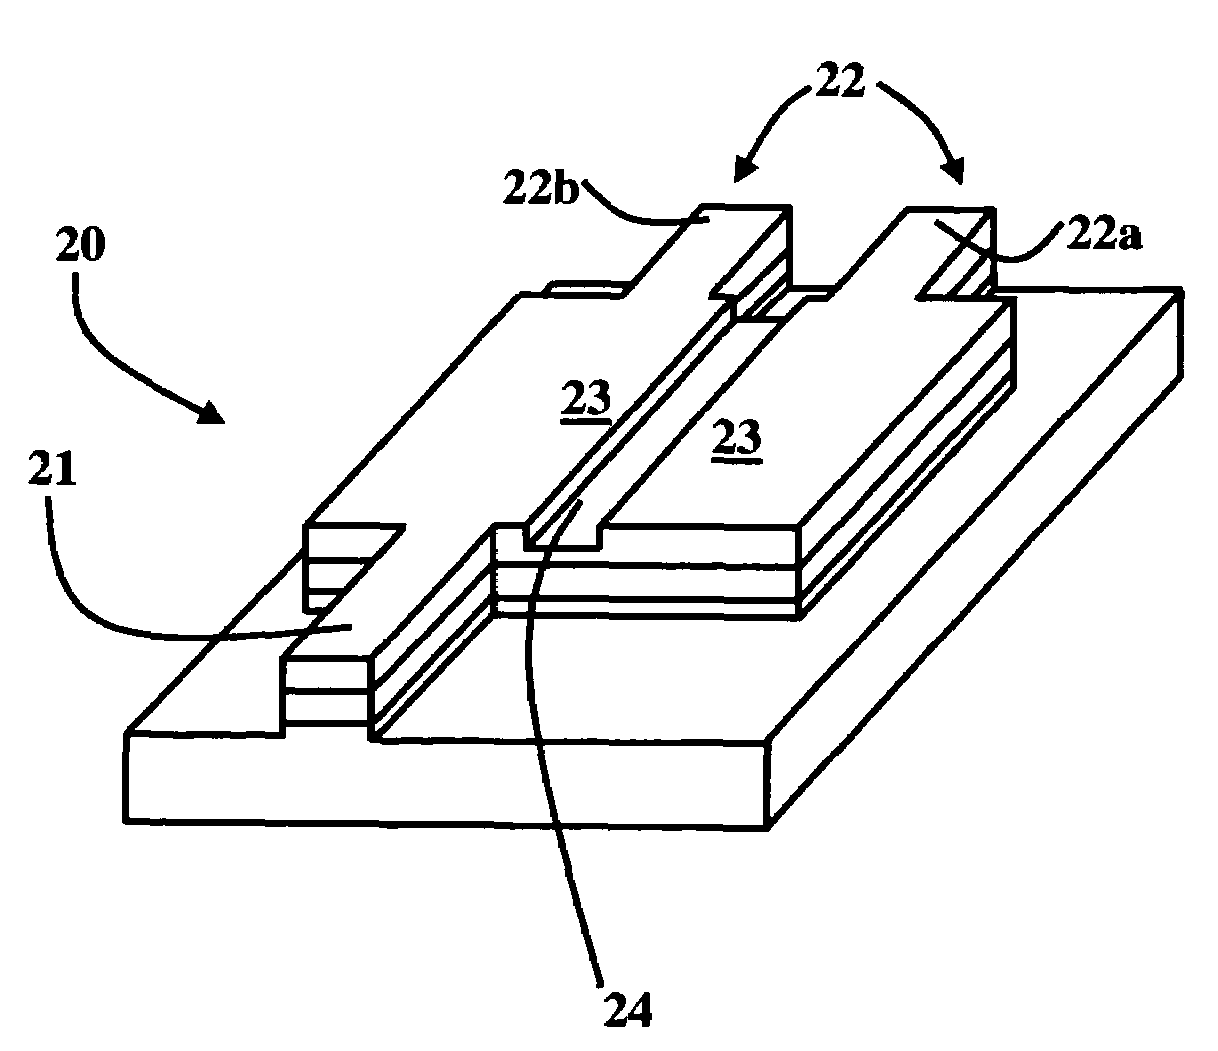 Slotted multimode interference device